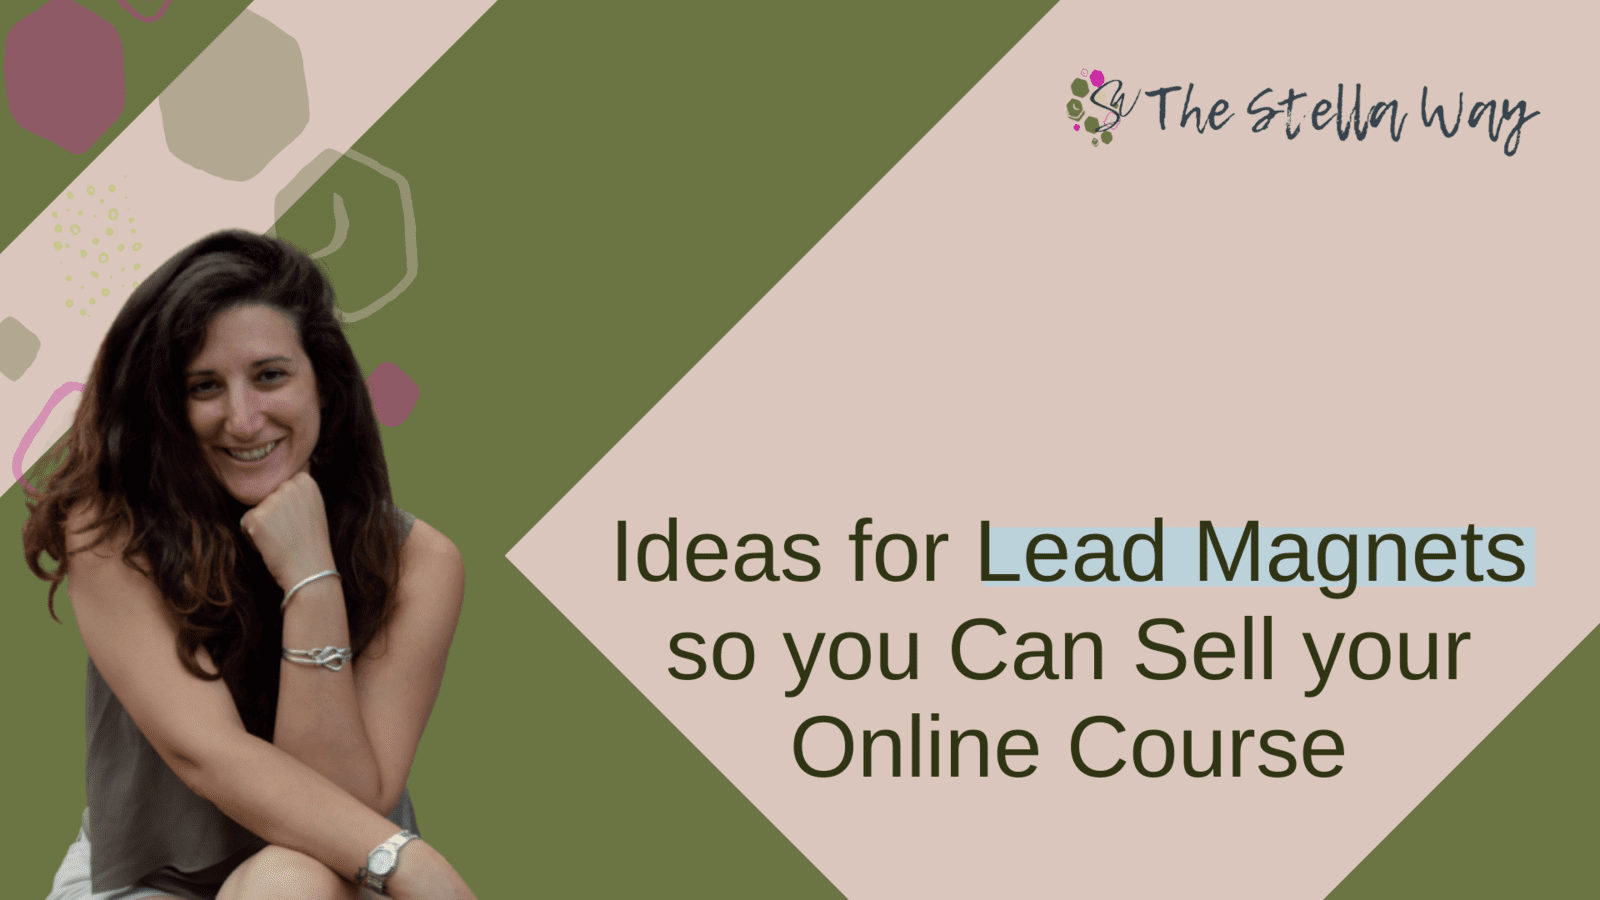 Ideas for Lead Magnets to Sell your Online Course